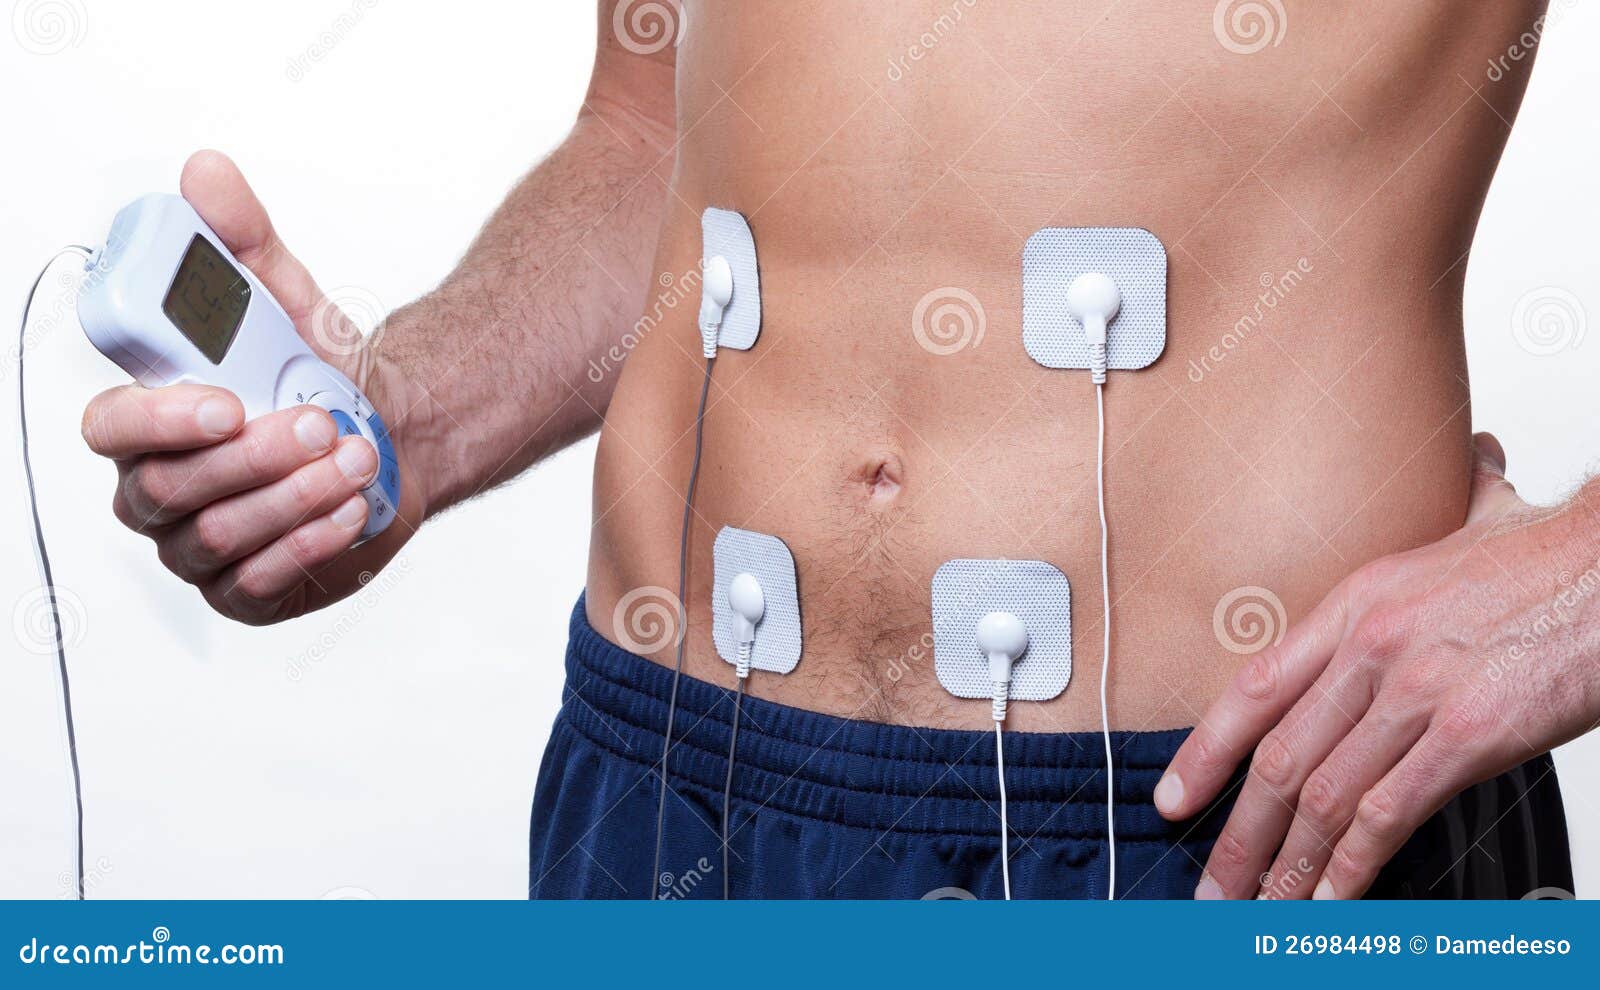 https://thumbs.dreamstime.com/z/ems-training-electrical-muscle-stimulation-26984498.jpg